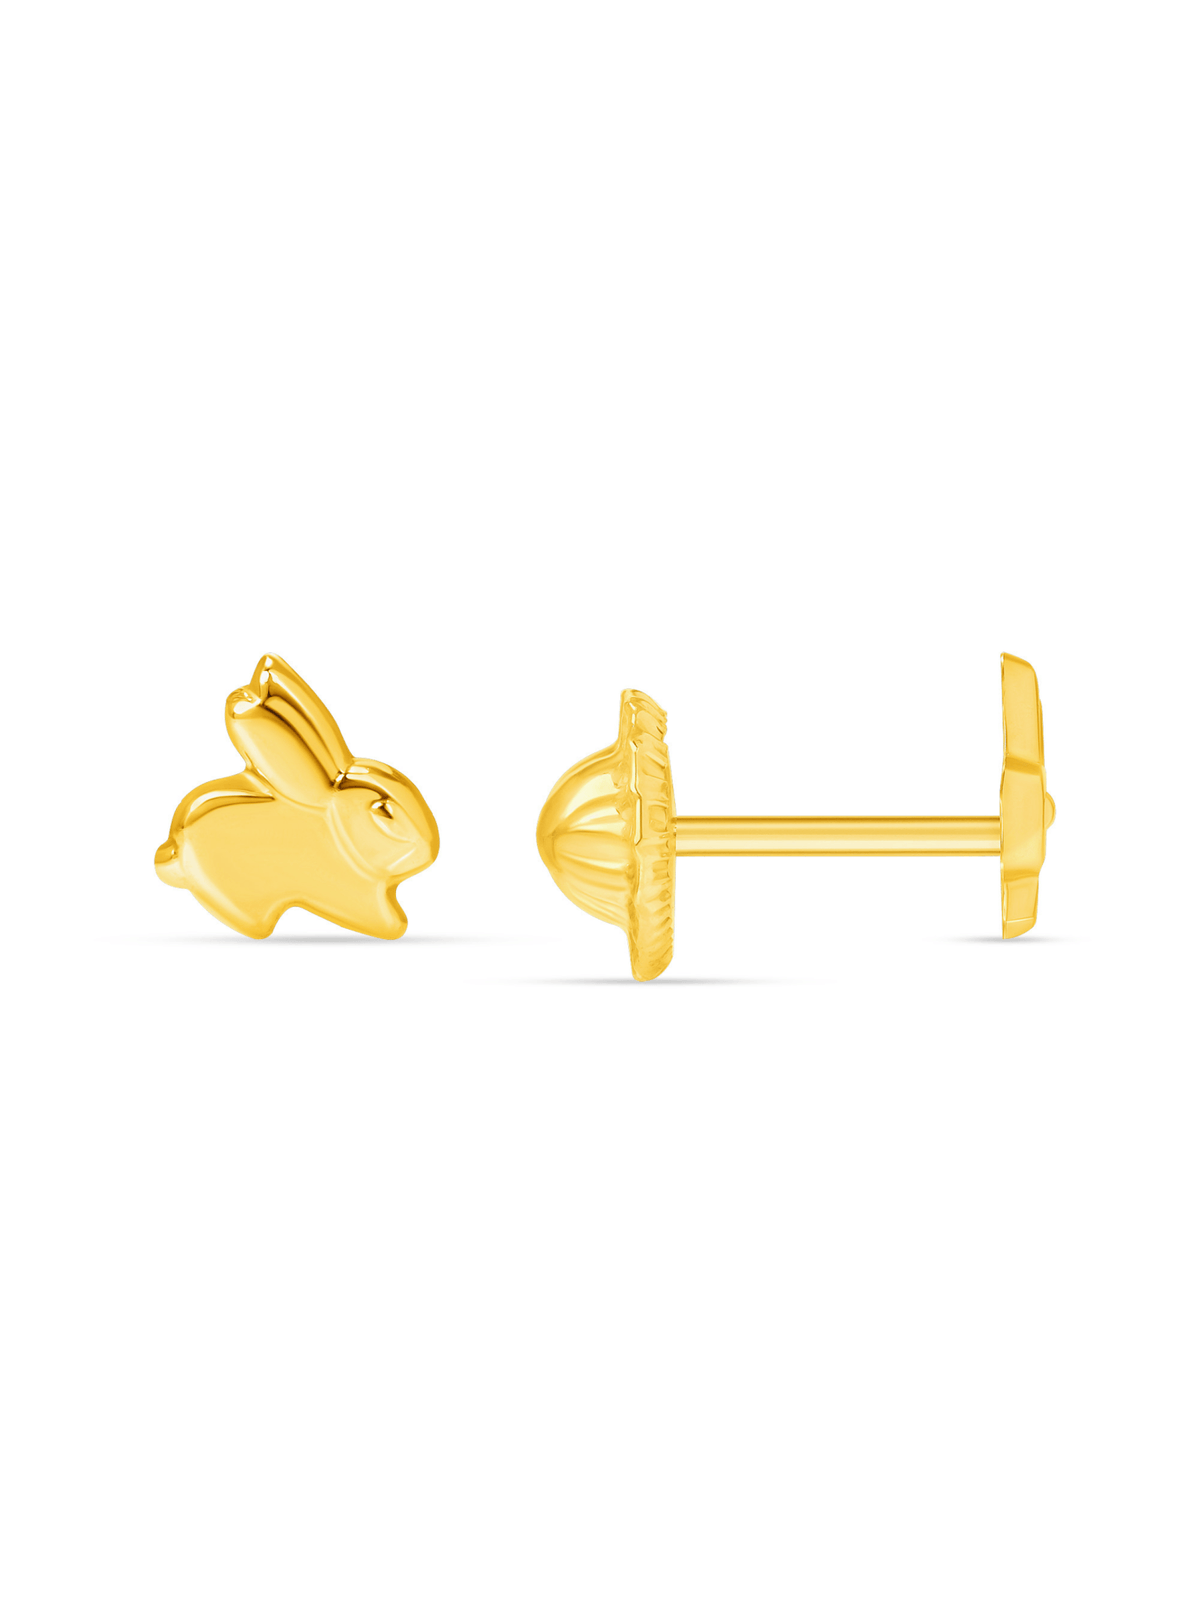 Gold bunny earrings on white background